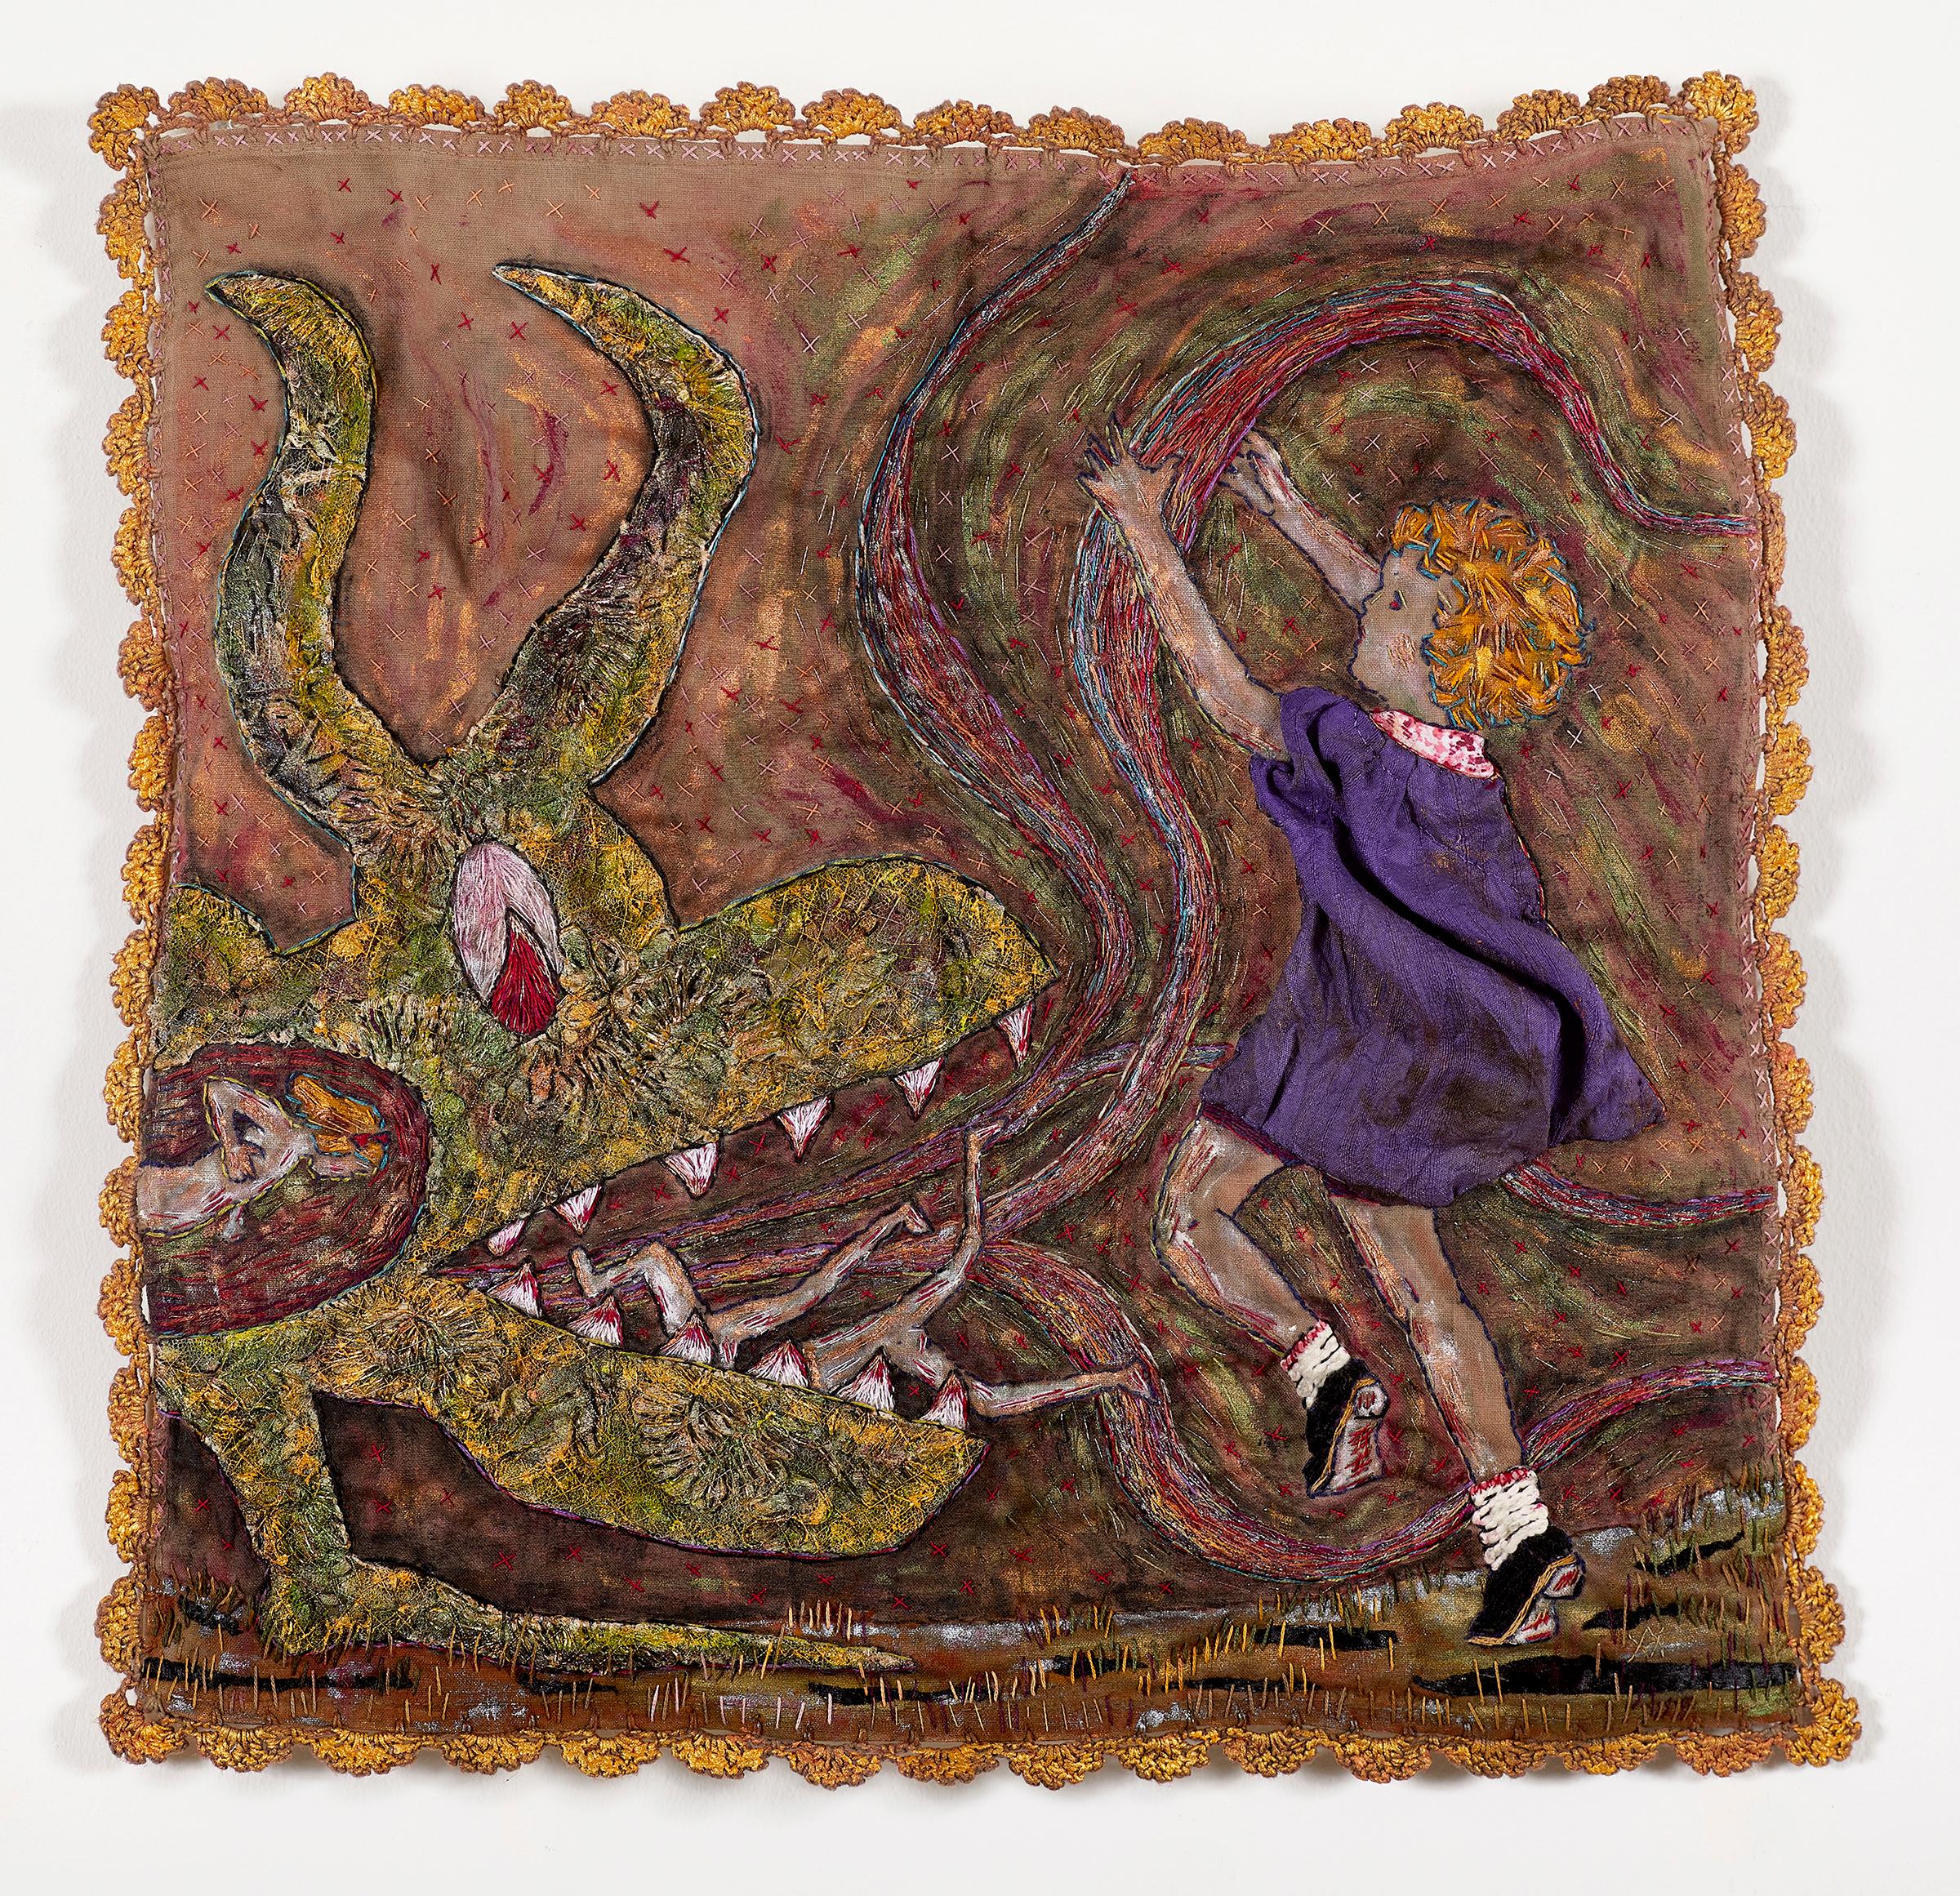 Fiber, Mixed Media, Hand Stitched: 'Hellmouth!' - Art by Ann Vollum